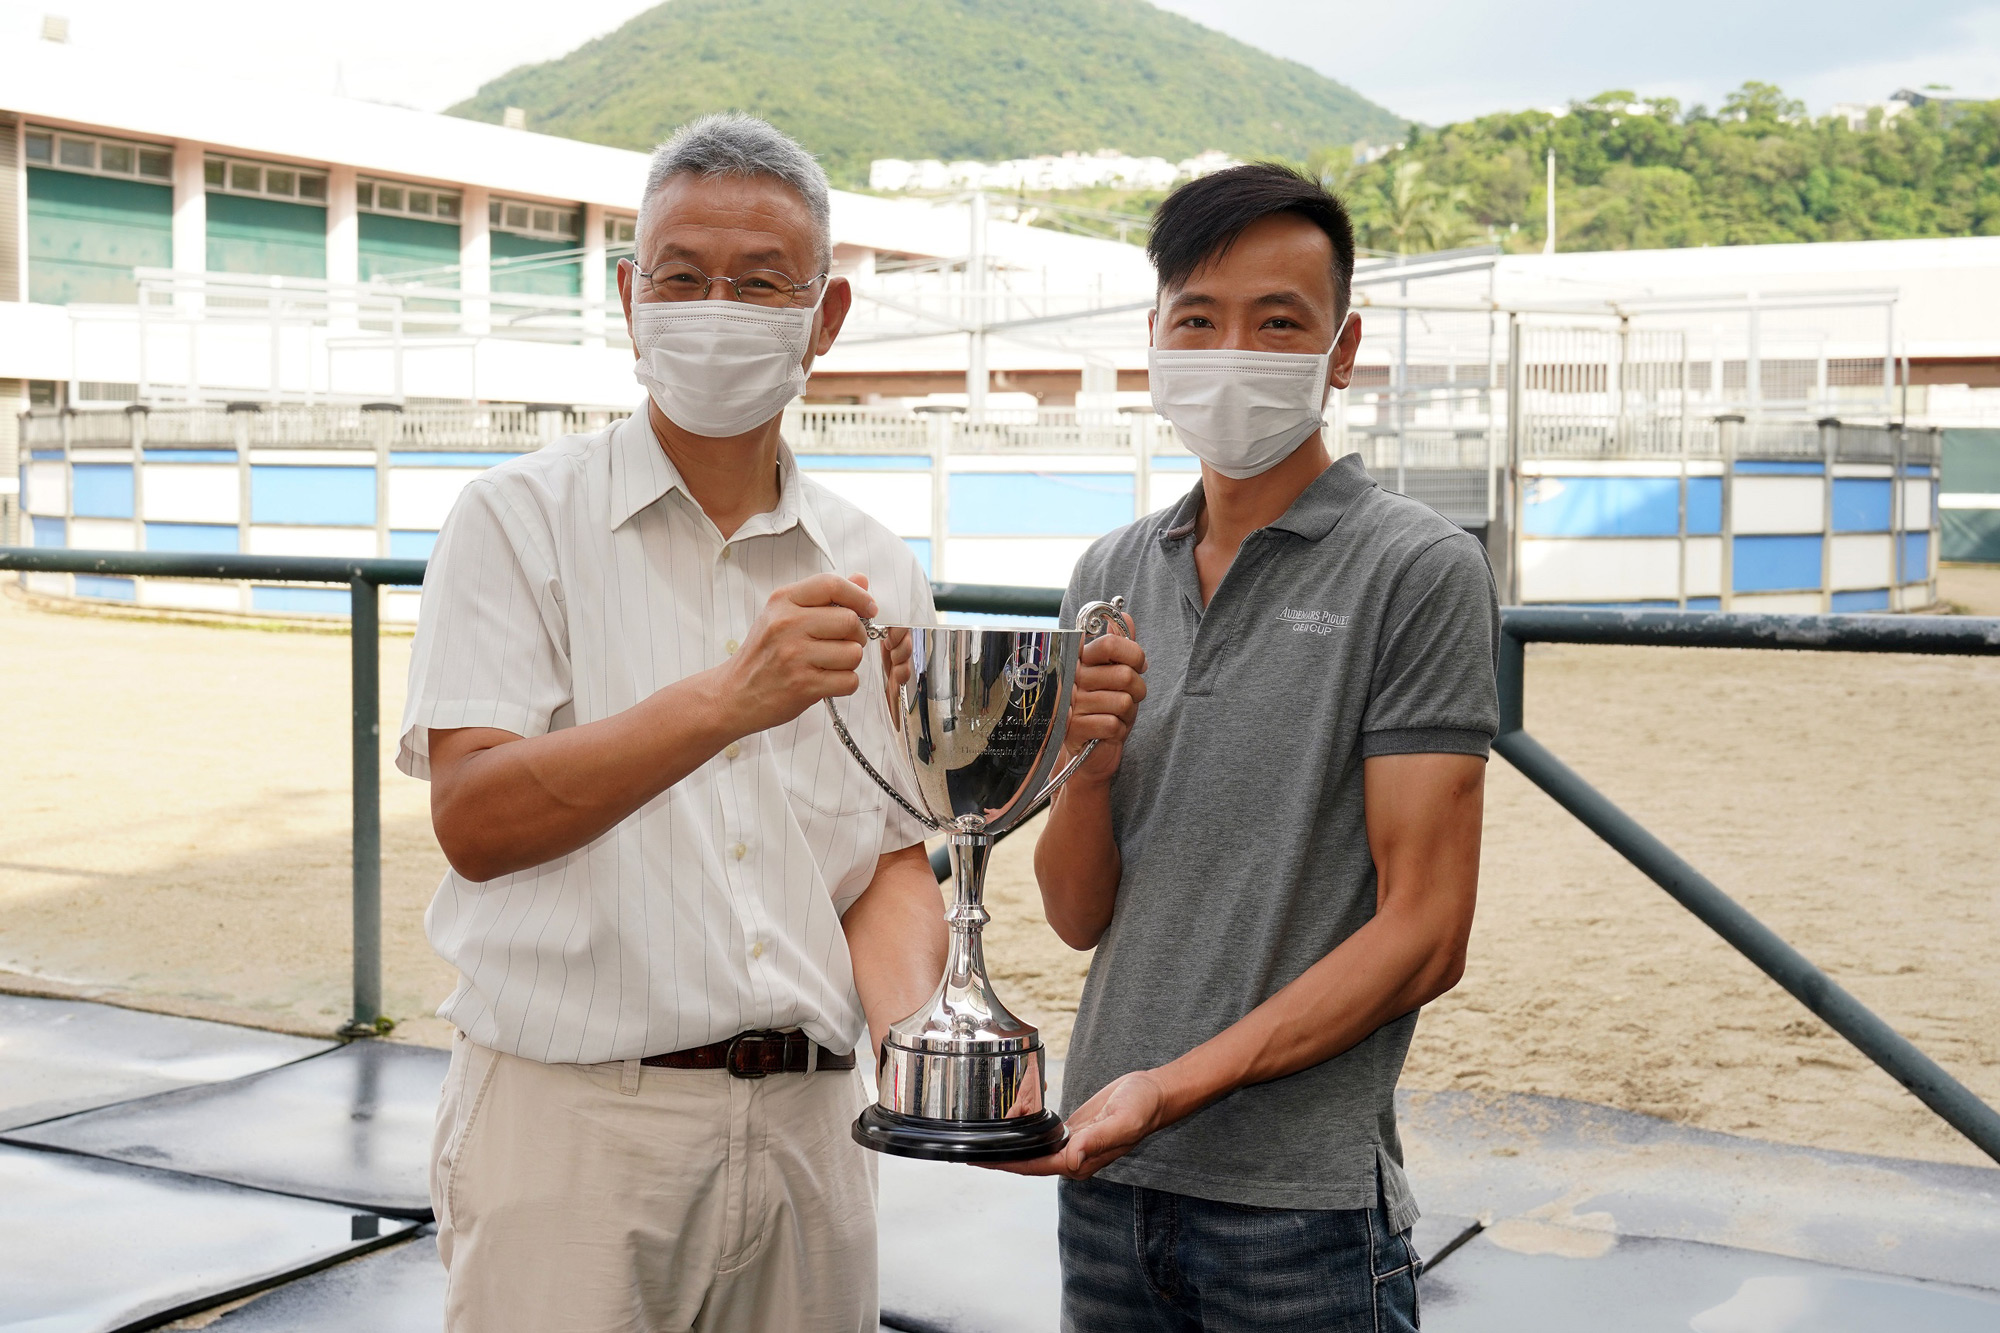 Assistant Trainer Philip Chung (right) receives the trophy for this season's Safest and Best Housekeeping Stable Award from Pako Ip (left), Executive Manager, Tracks, at Sha Tin racecourse today. Caspar Fownes stable wins the award for the first time.